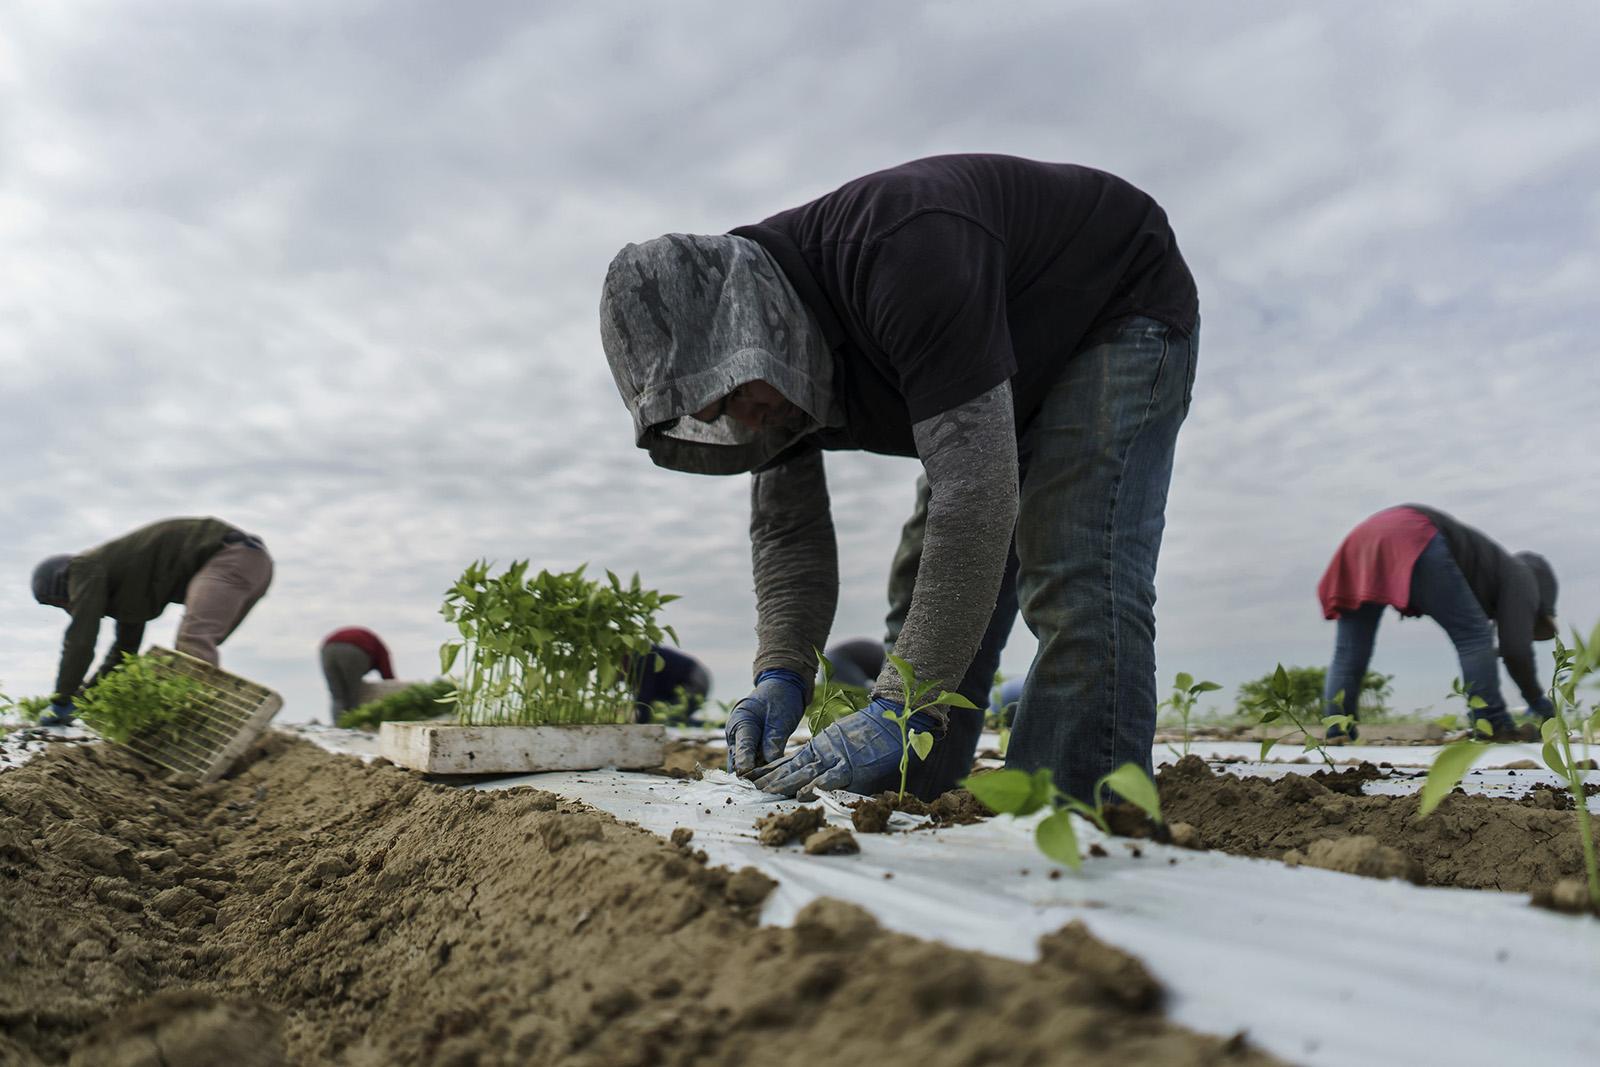 Migrant farm workers transplant jalapeno sprouts from trucks into the soil at a farm on March 7, 2018, in Lamont, Calif. Two California Democrats filed legislation that would give undocumented immigrant farmworkers and their families a path to legal resident status and possibly U.S. citizenship. (Marcus Yam/Los Angeles Times/TNS)